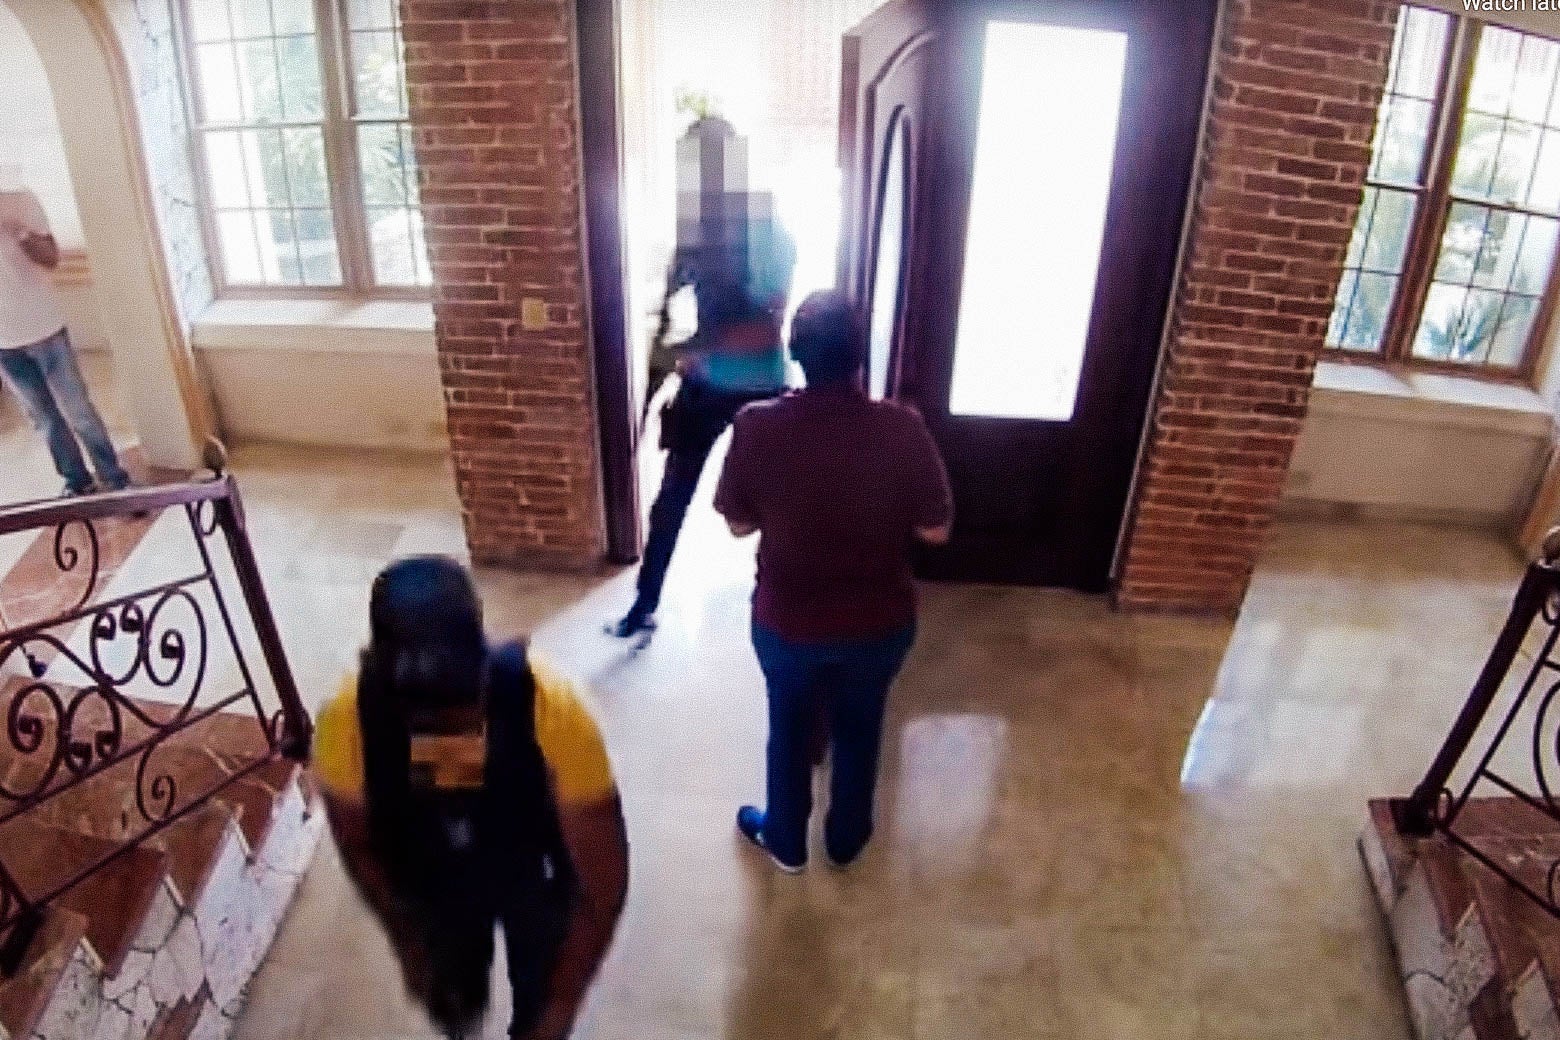 A housekeeper opens the door to a house as local authorities enter with guns and bulletproof vests.